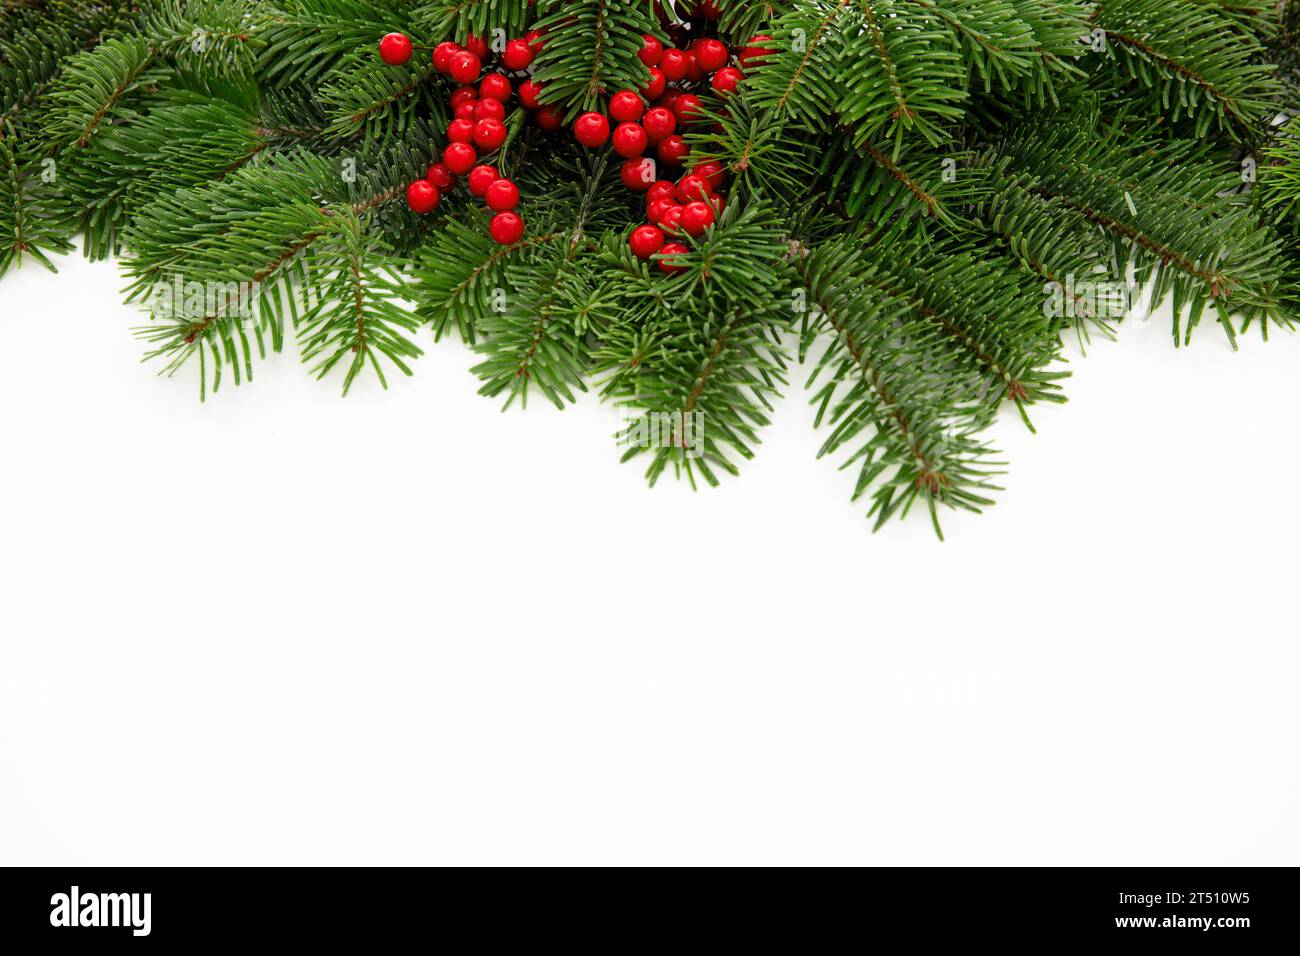 Christmas tree border decorated with red berries isolated on white background, greeting card template Stock Photo